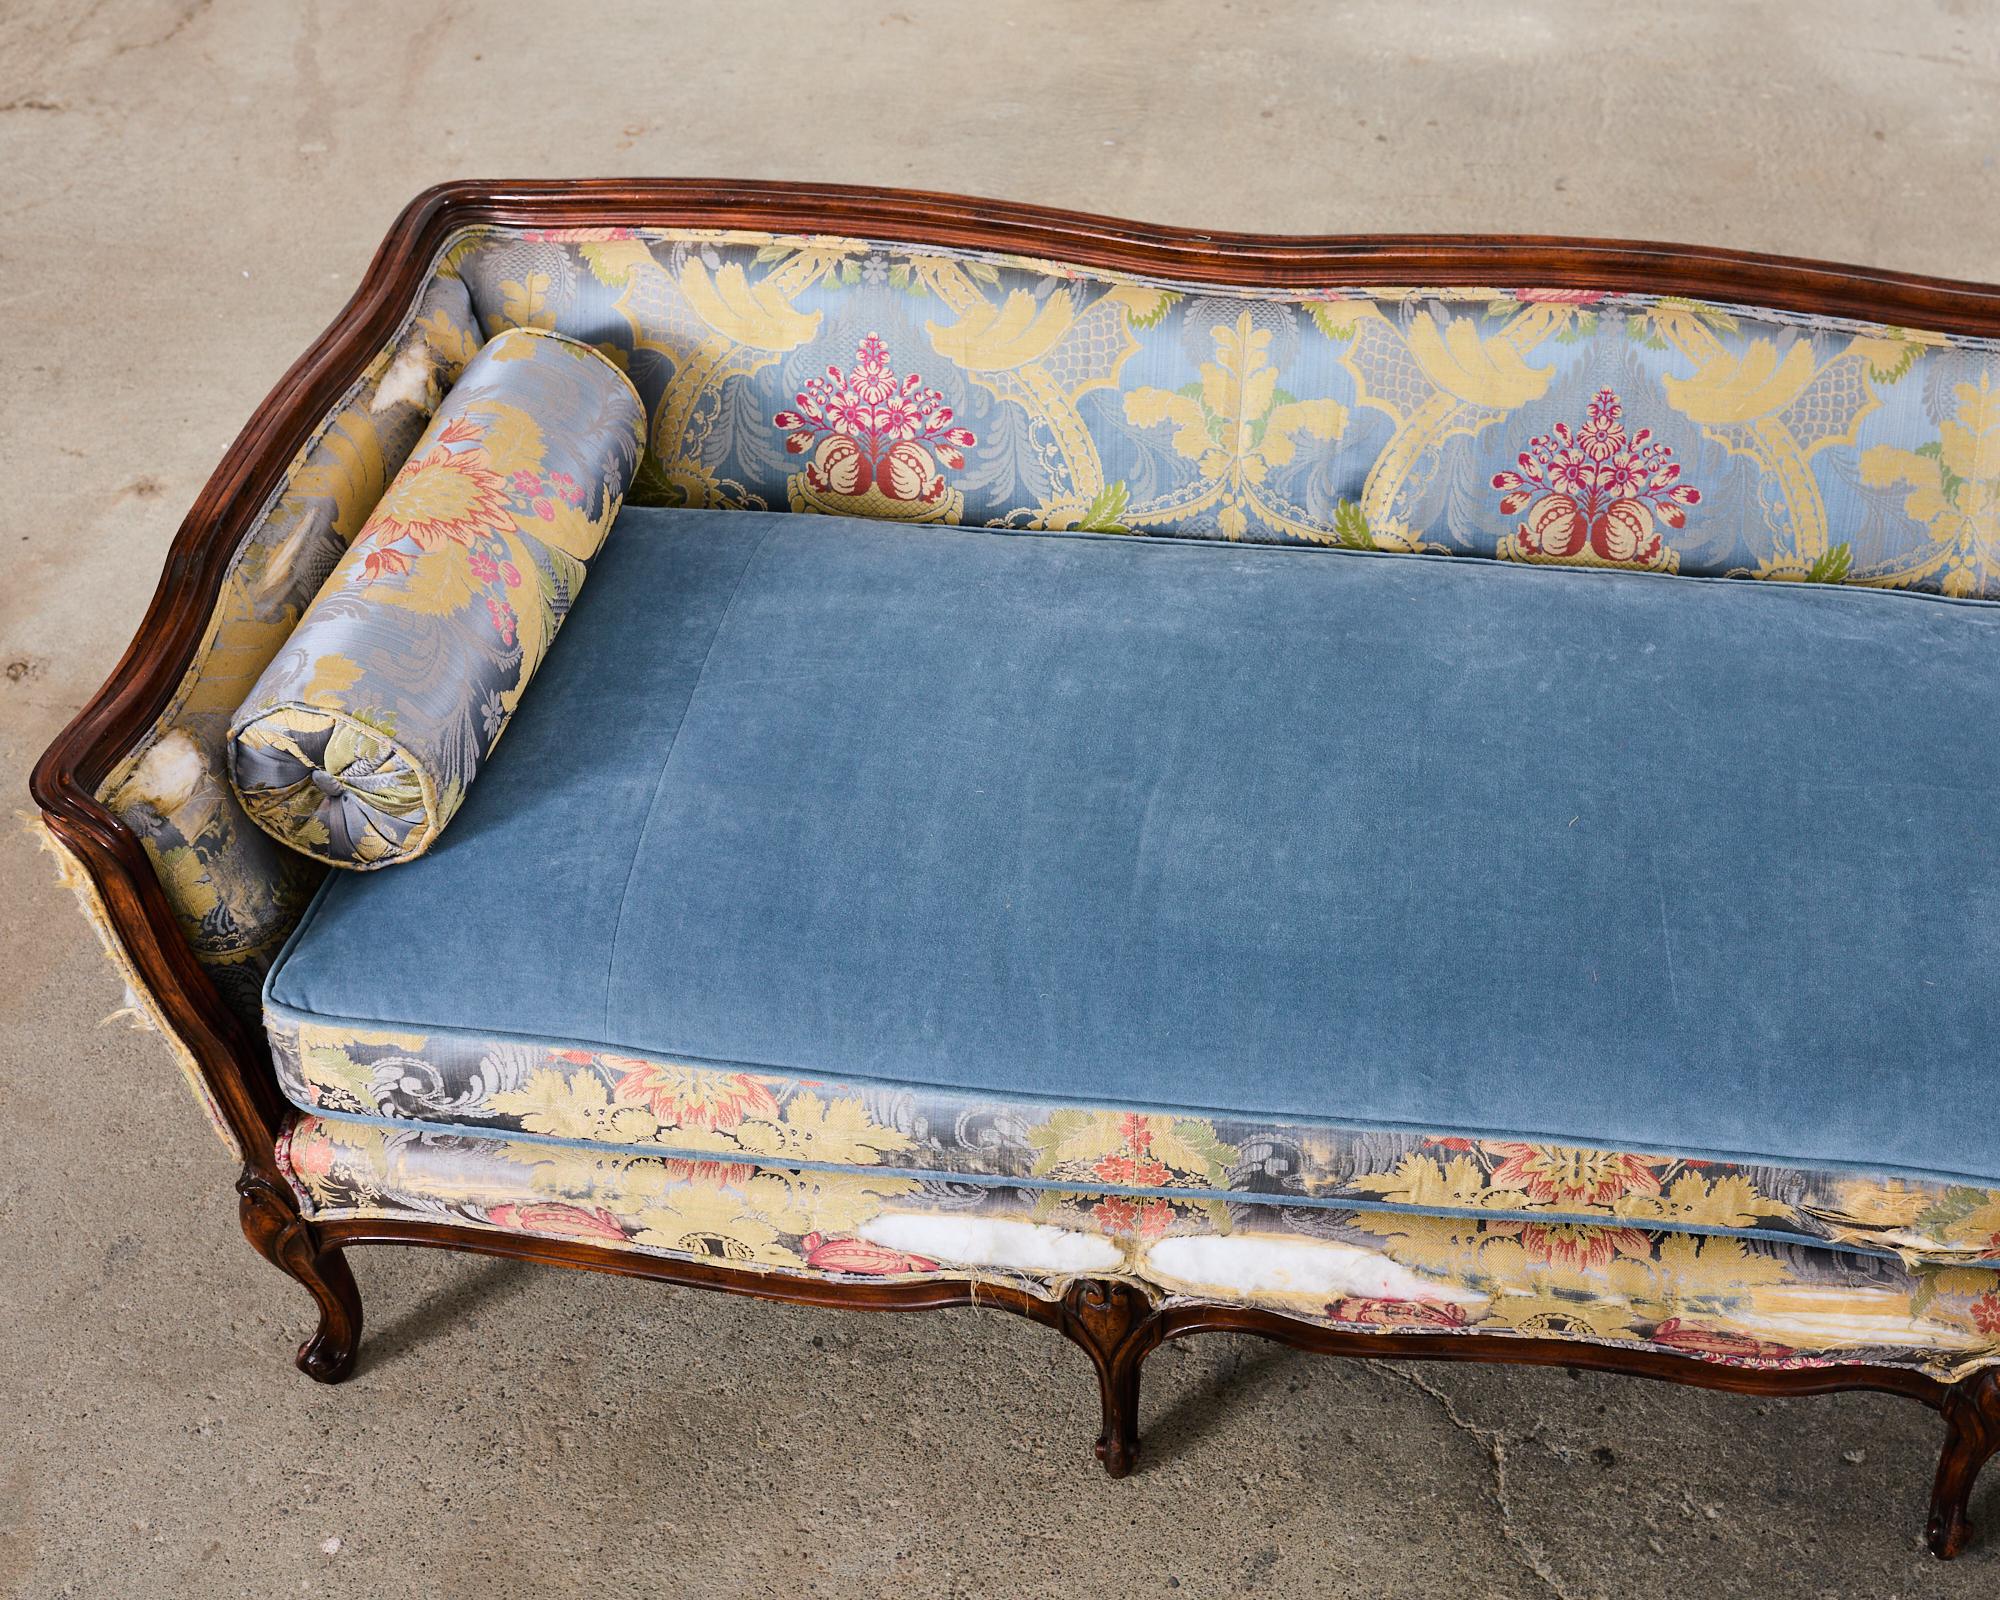 French Provincial Louis XV Style Serpentine Canape Sofa Settee For Sale 1